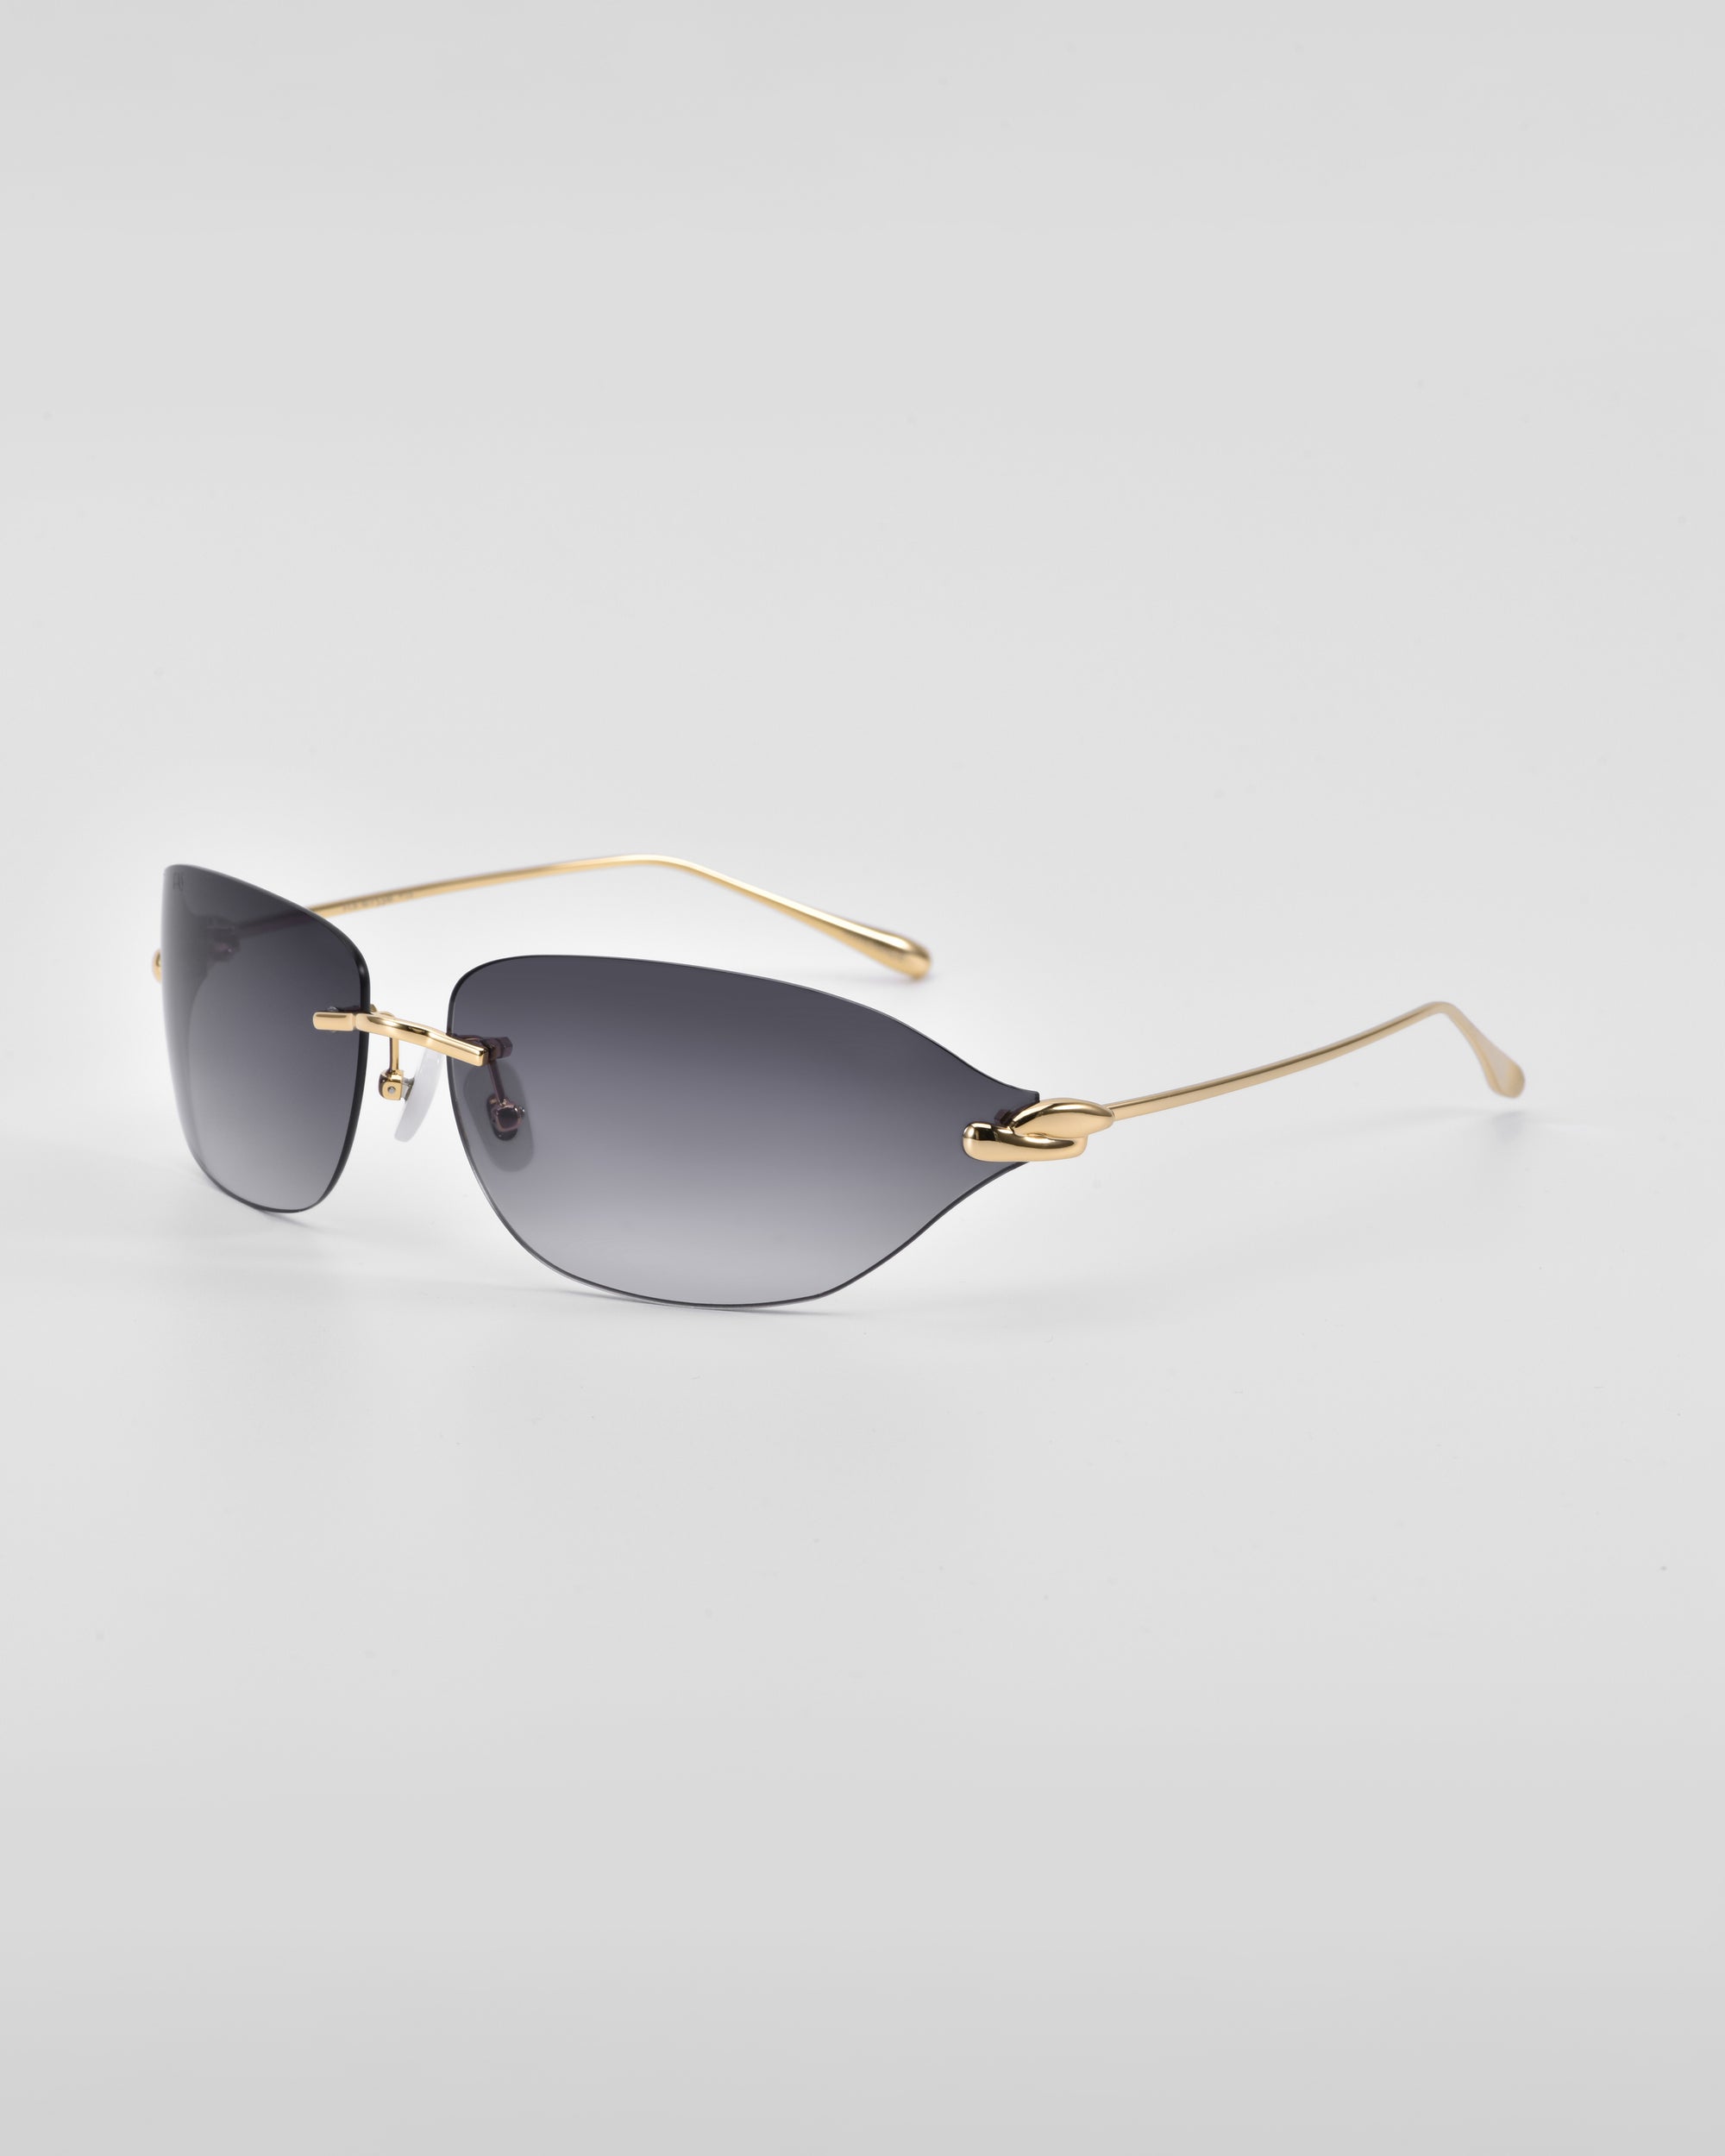 A pair of stylish For Art&#39;s Sake® Serpent I rimless sunglasses with dark tinted lenses and golden thin arms, photographed on a white surface. The minimalistic design, featuring 18-karat gold plating, gives them a sleek, modern look.